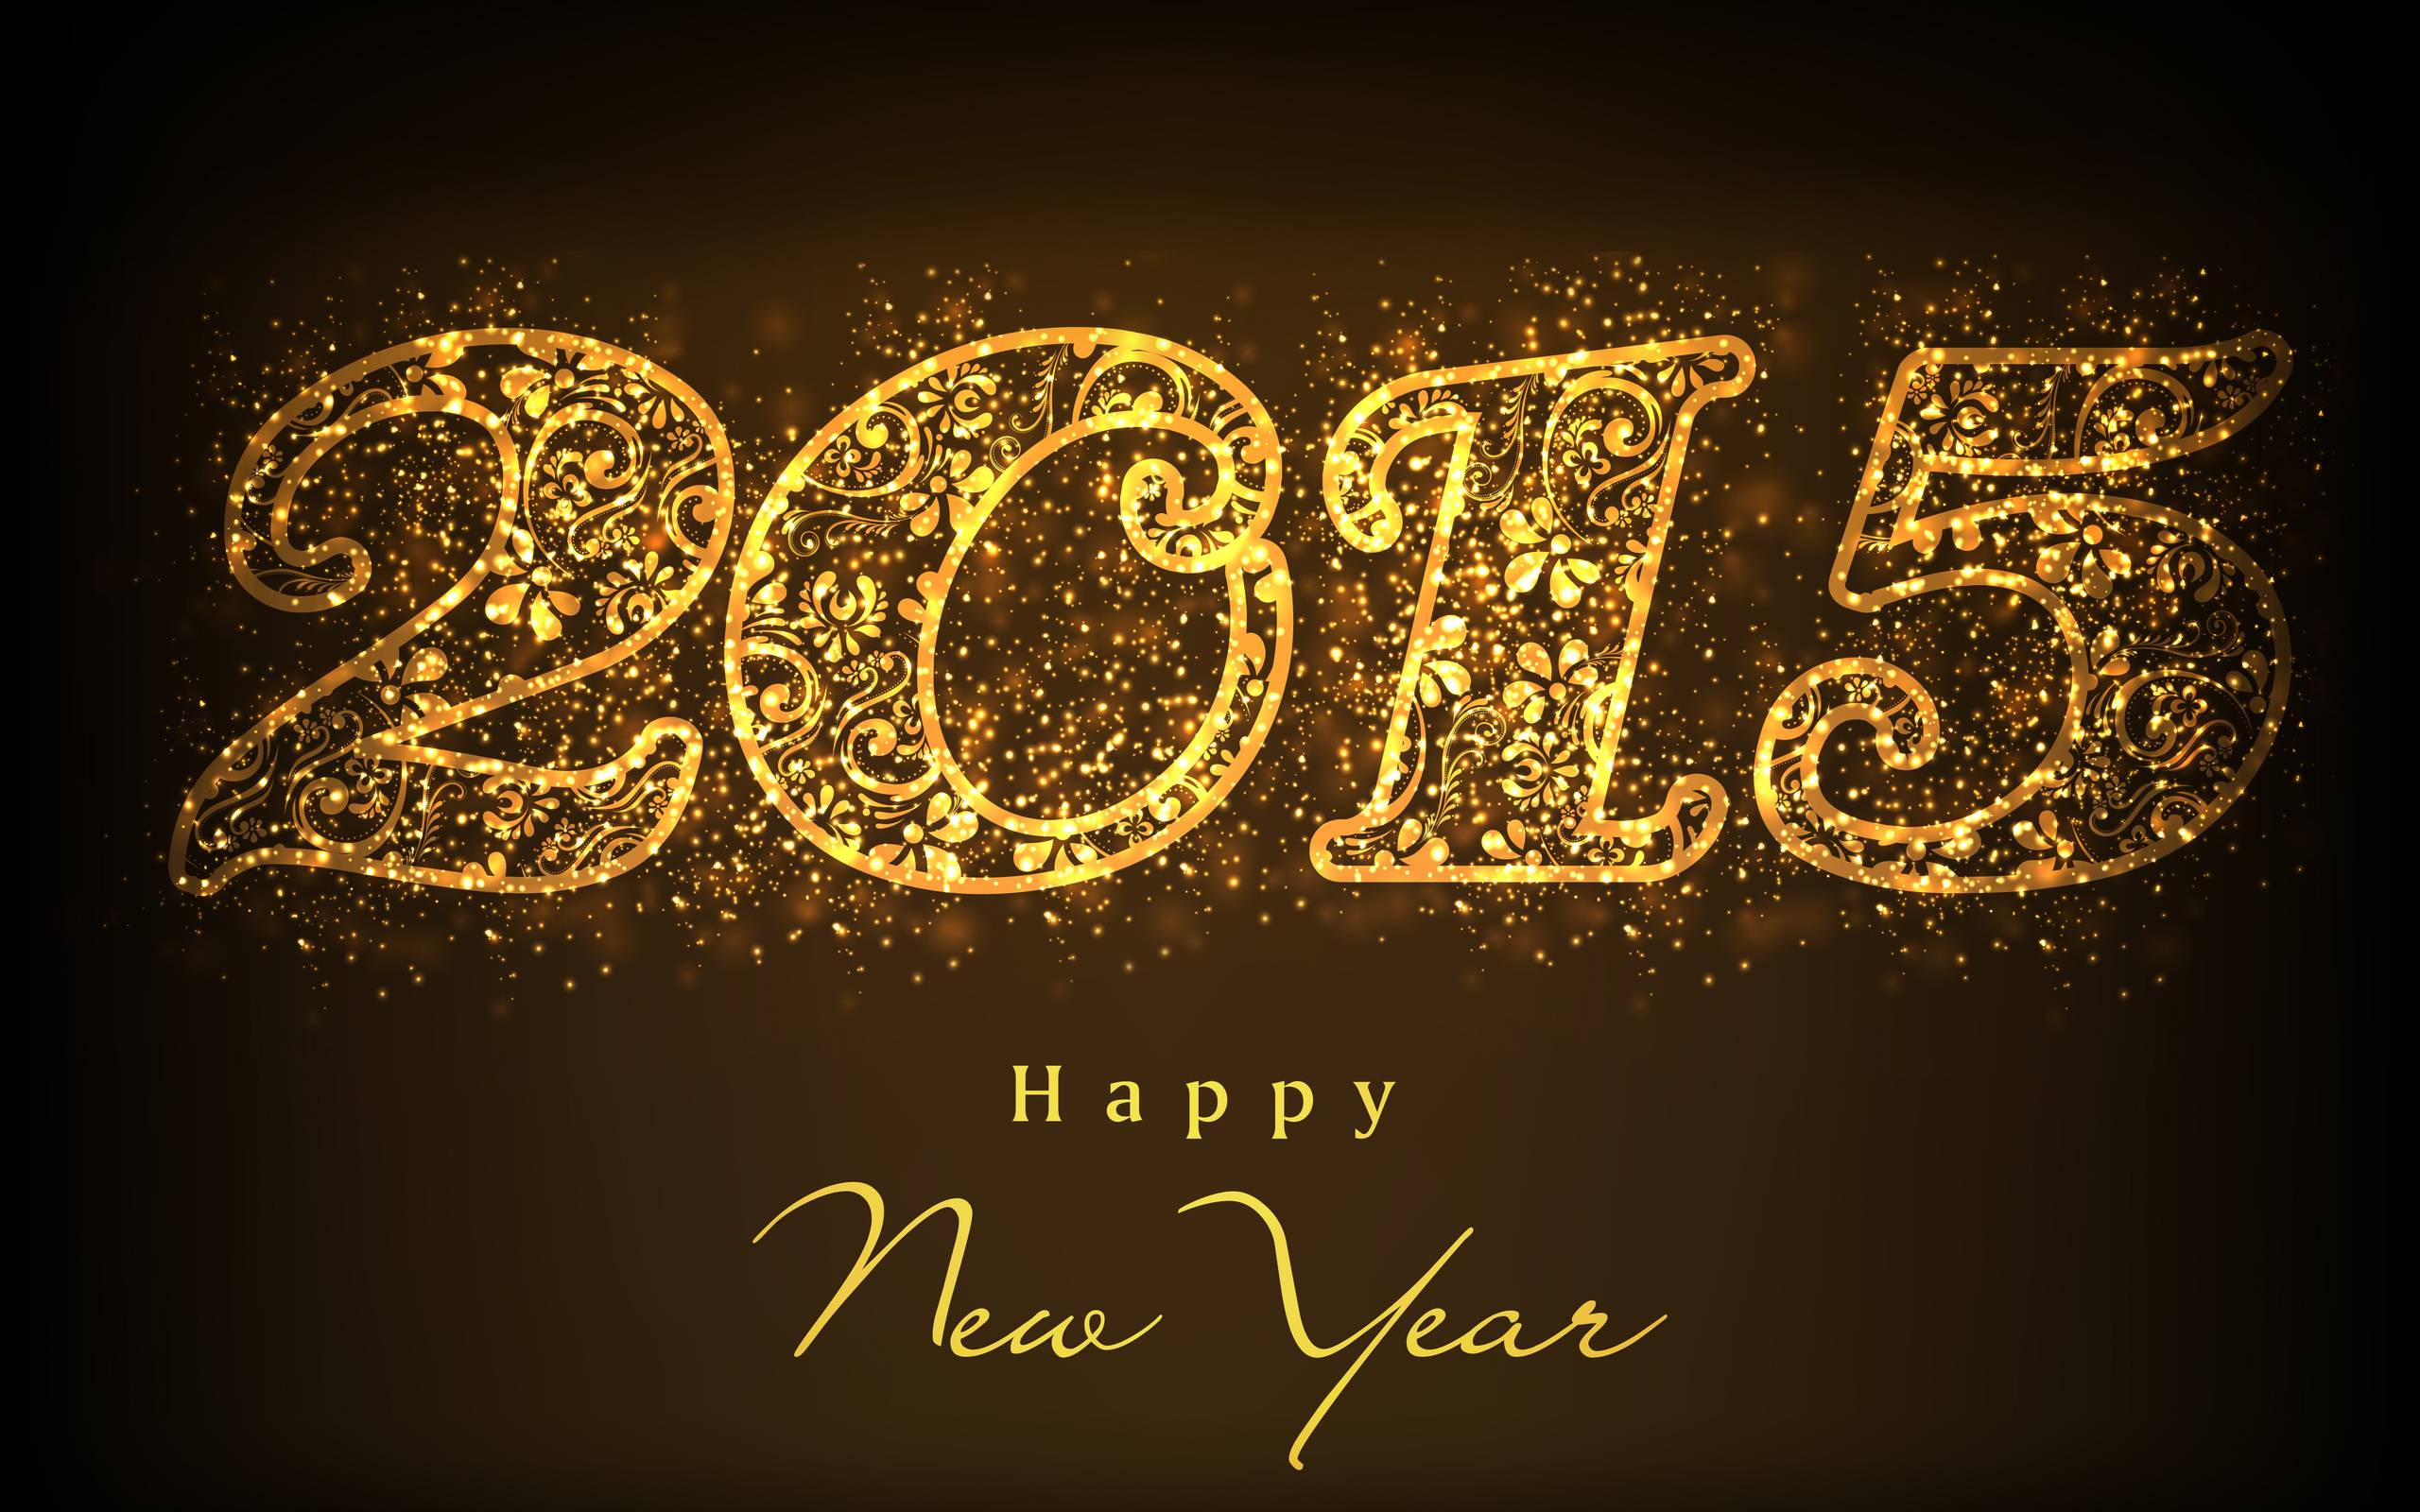 Happy New Year 2015 Artwork Wallpaper Wide or HD. Holidays